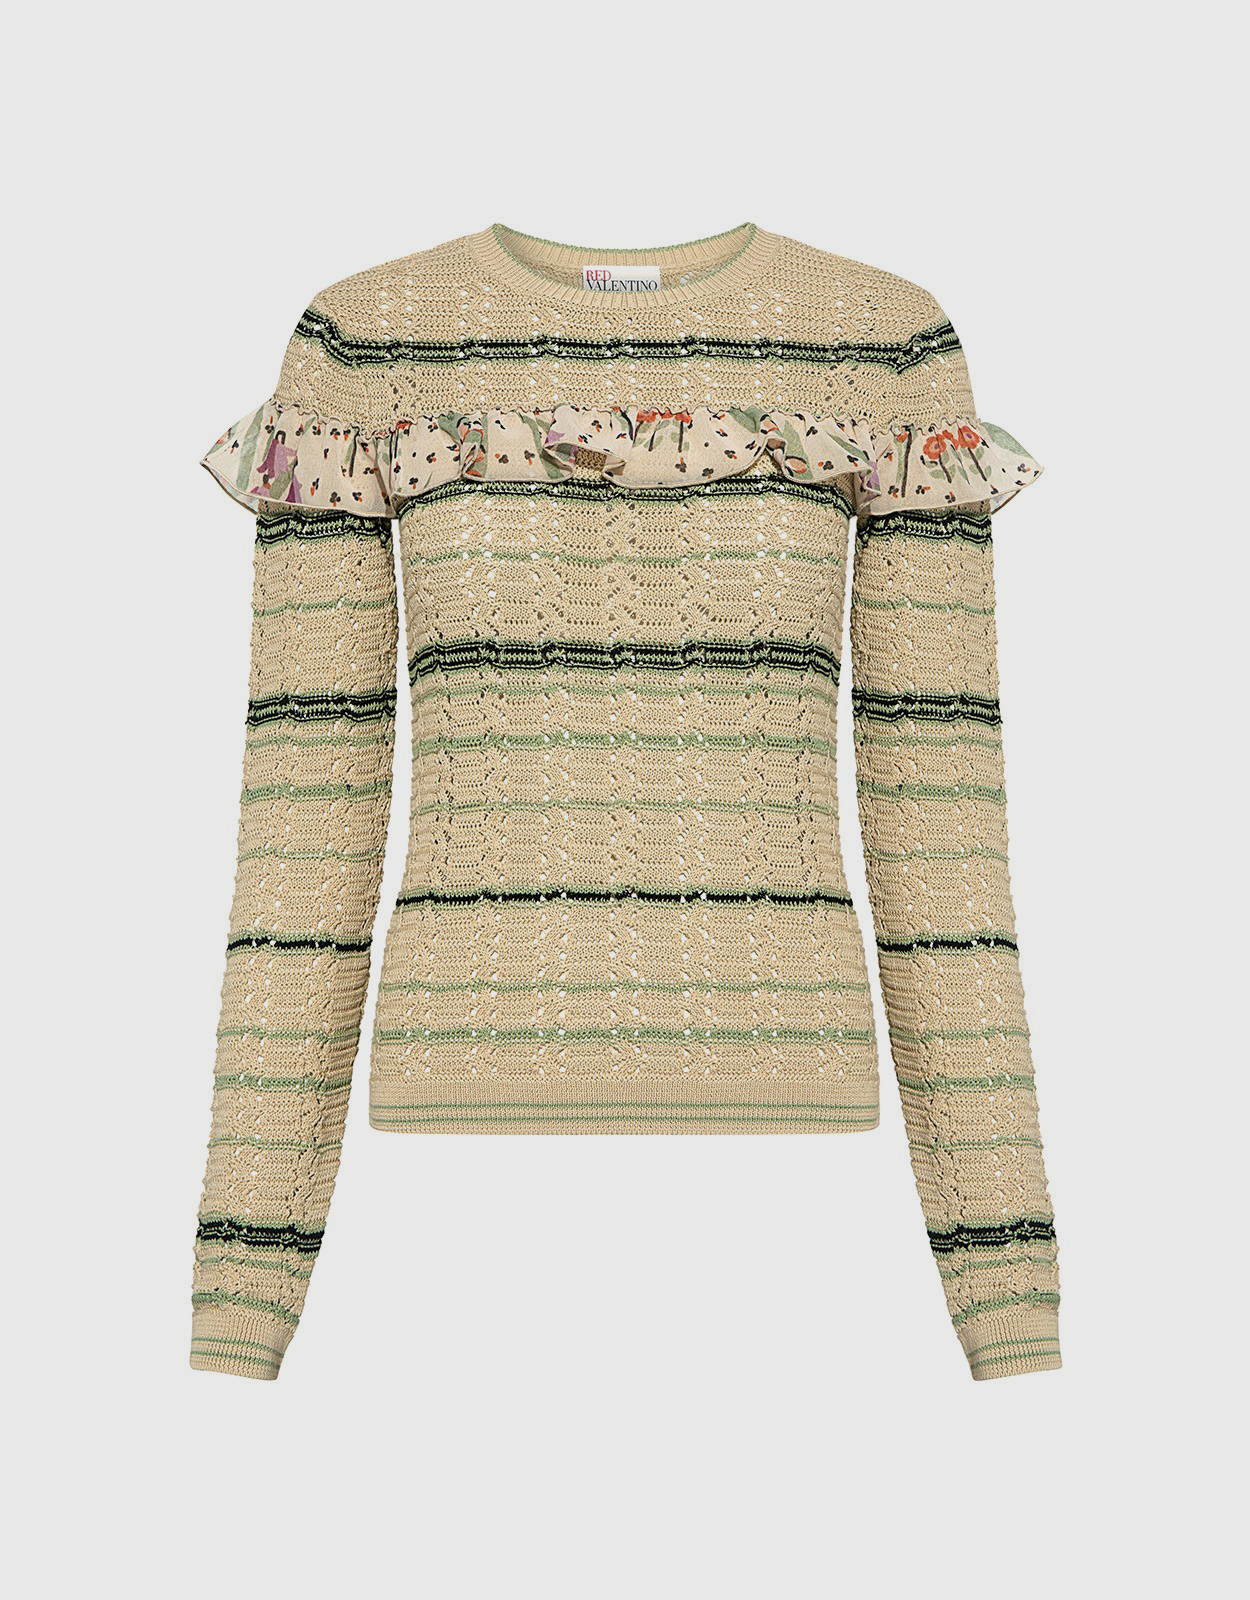 Red Valentino Floral Ruffle Detail Striped Sweater (Knitwear,Tops)  IFCHIC.COM